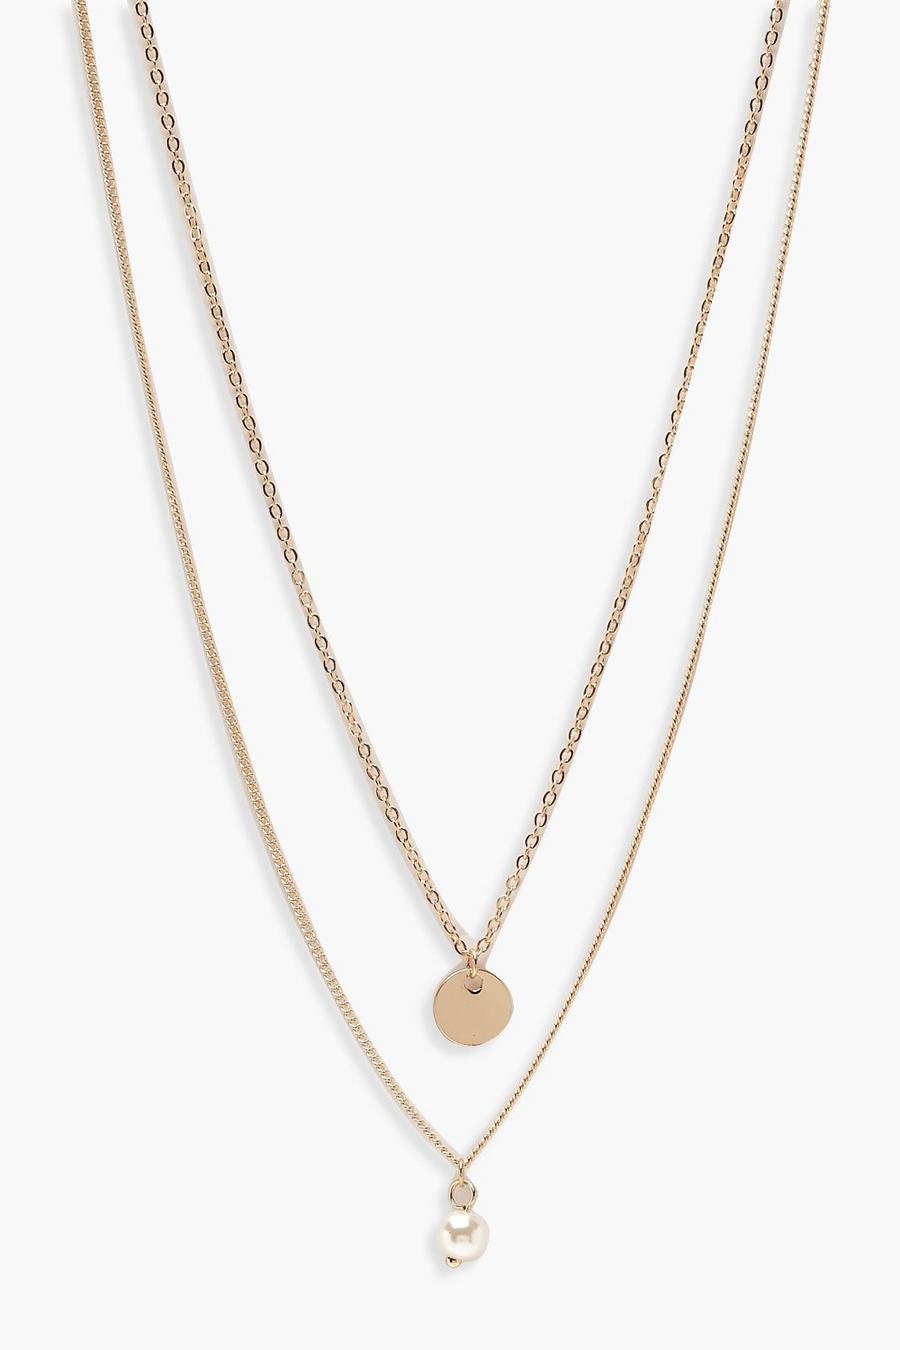 Gold metallic Circle & Pearl Simple Layered Necklace